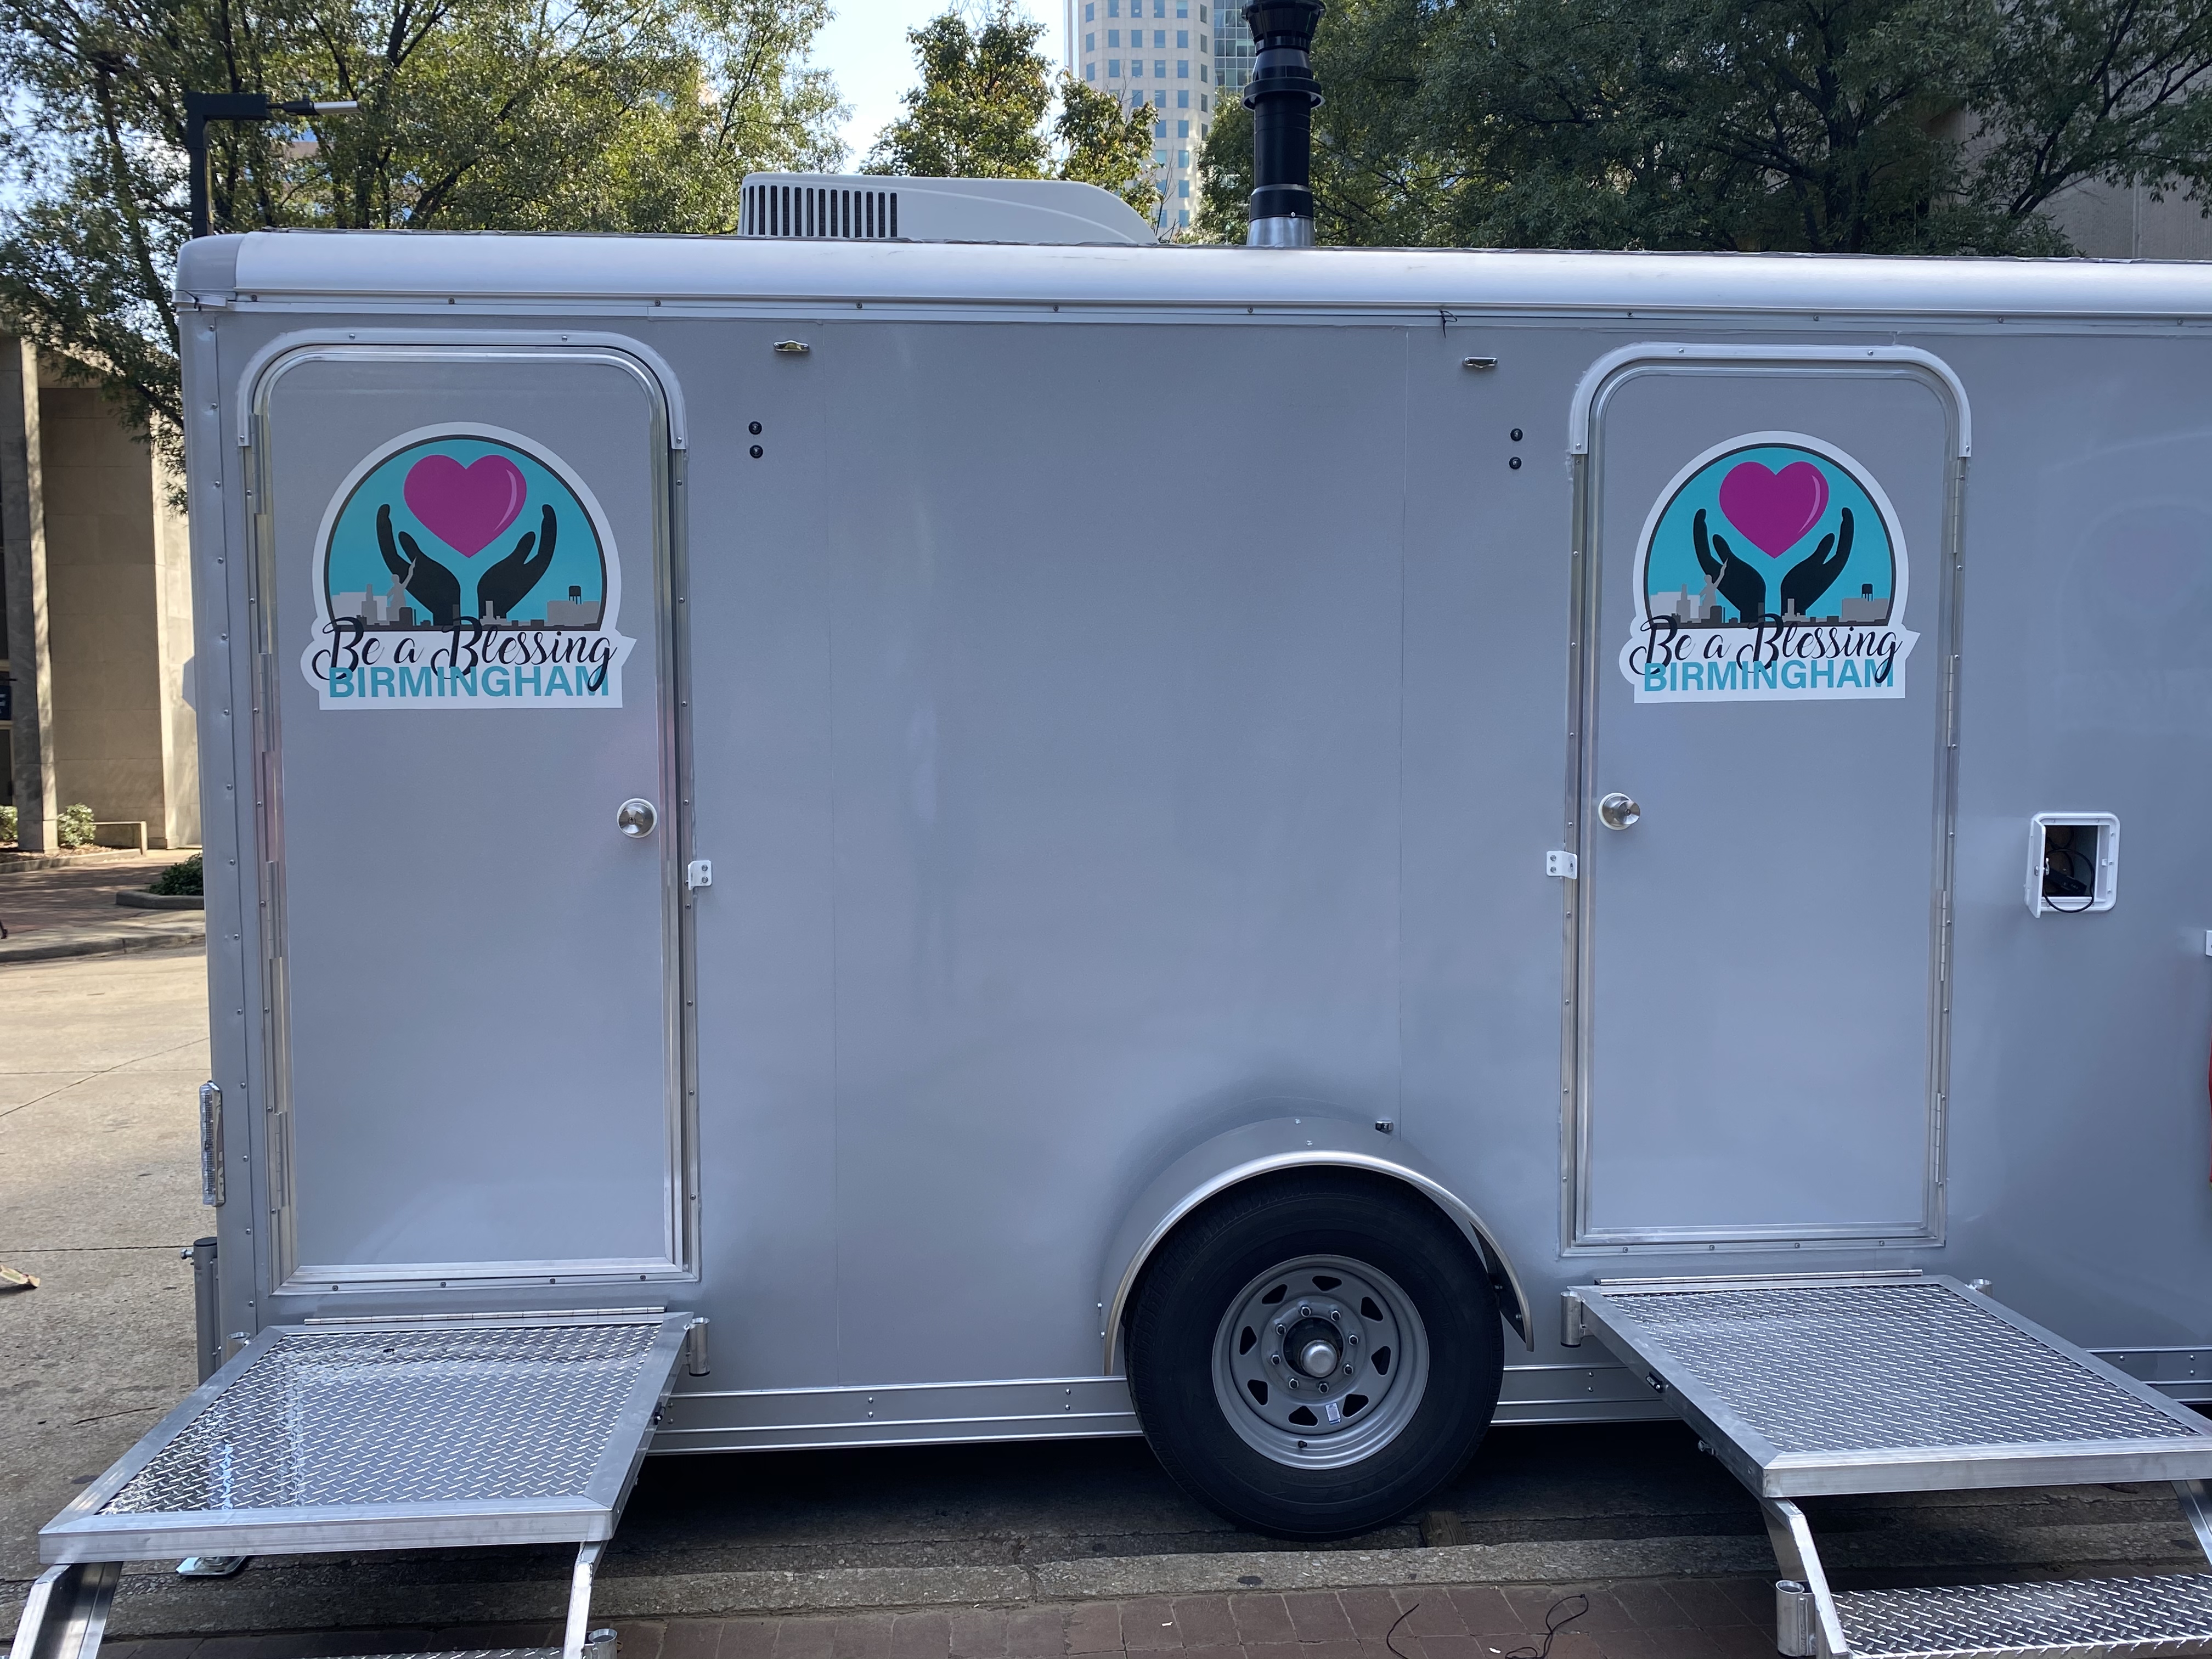 Shower Power, a mobile shower unit, brings showers to the homeless